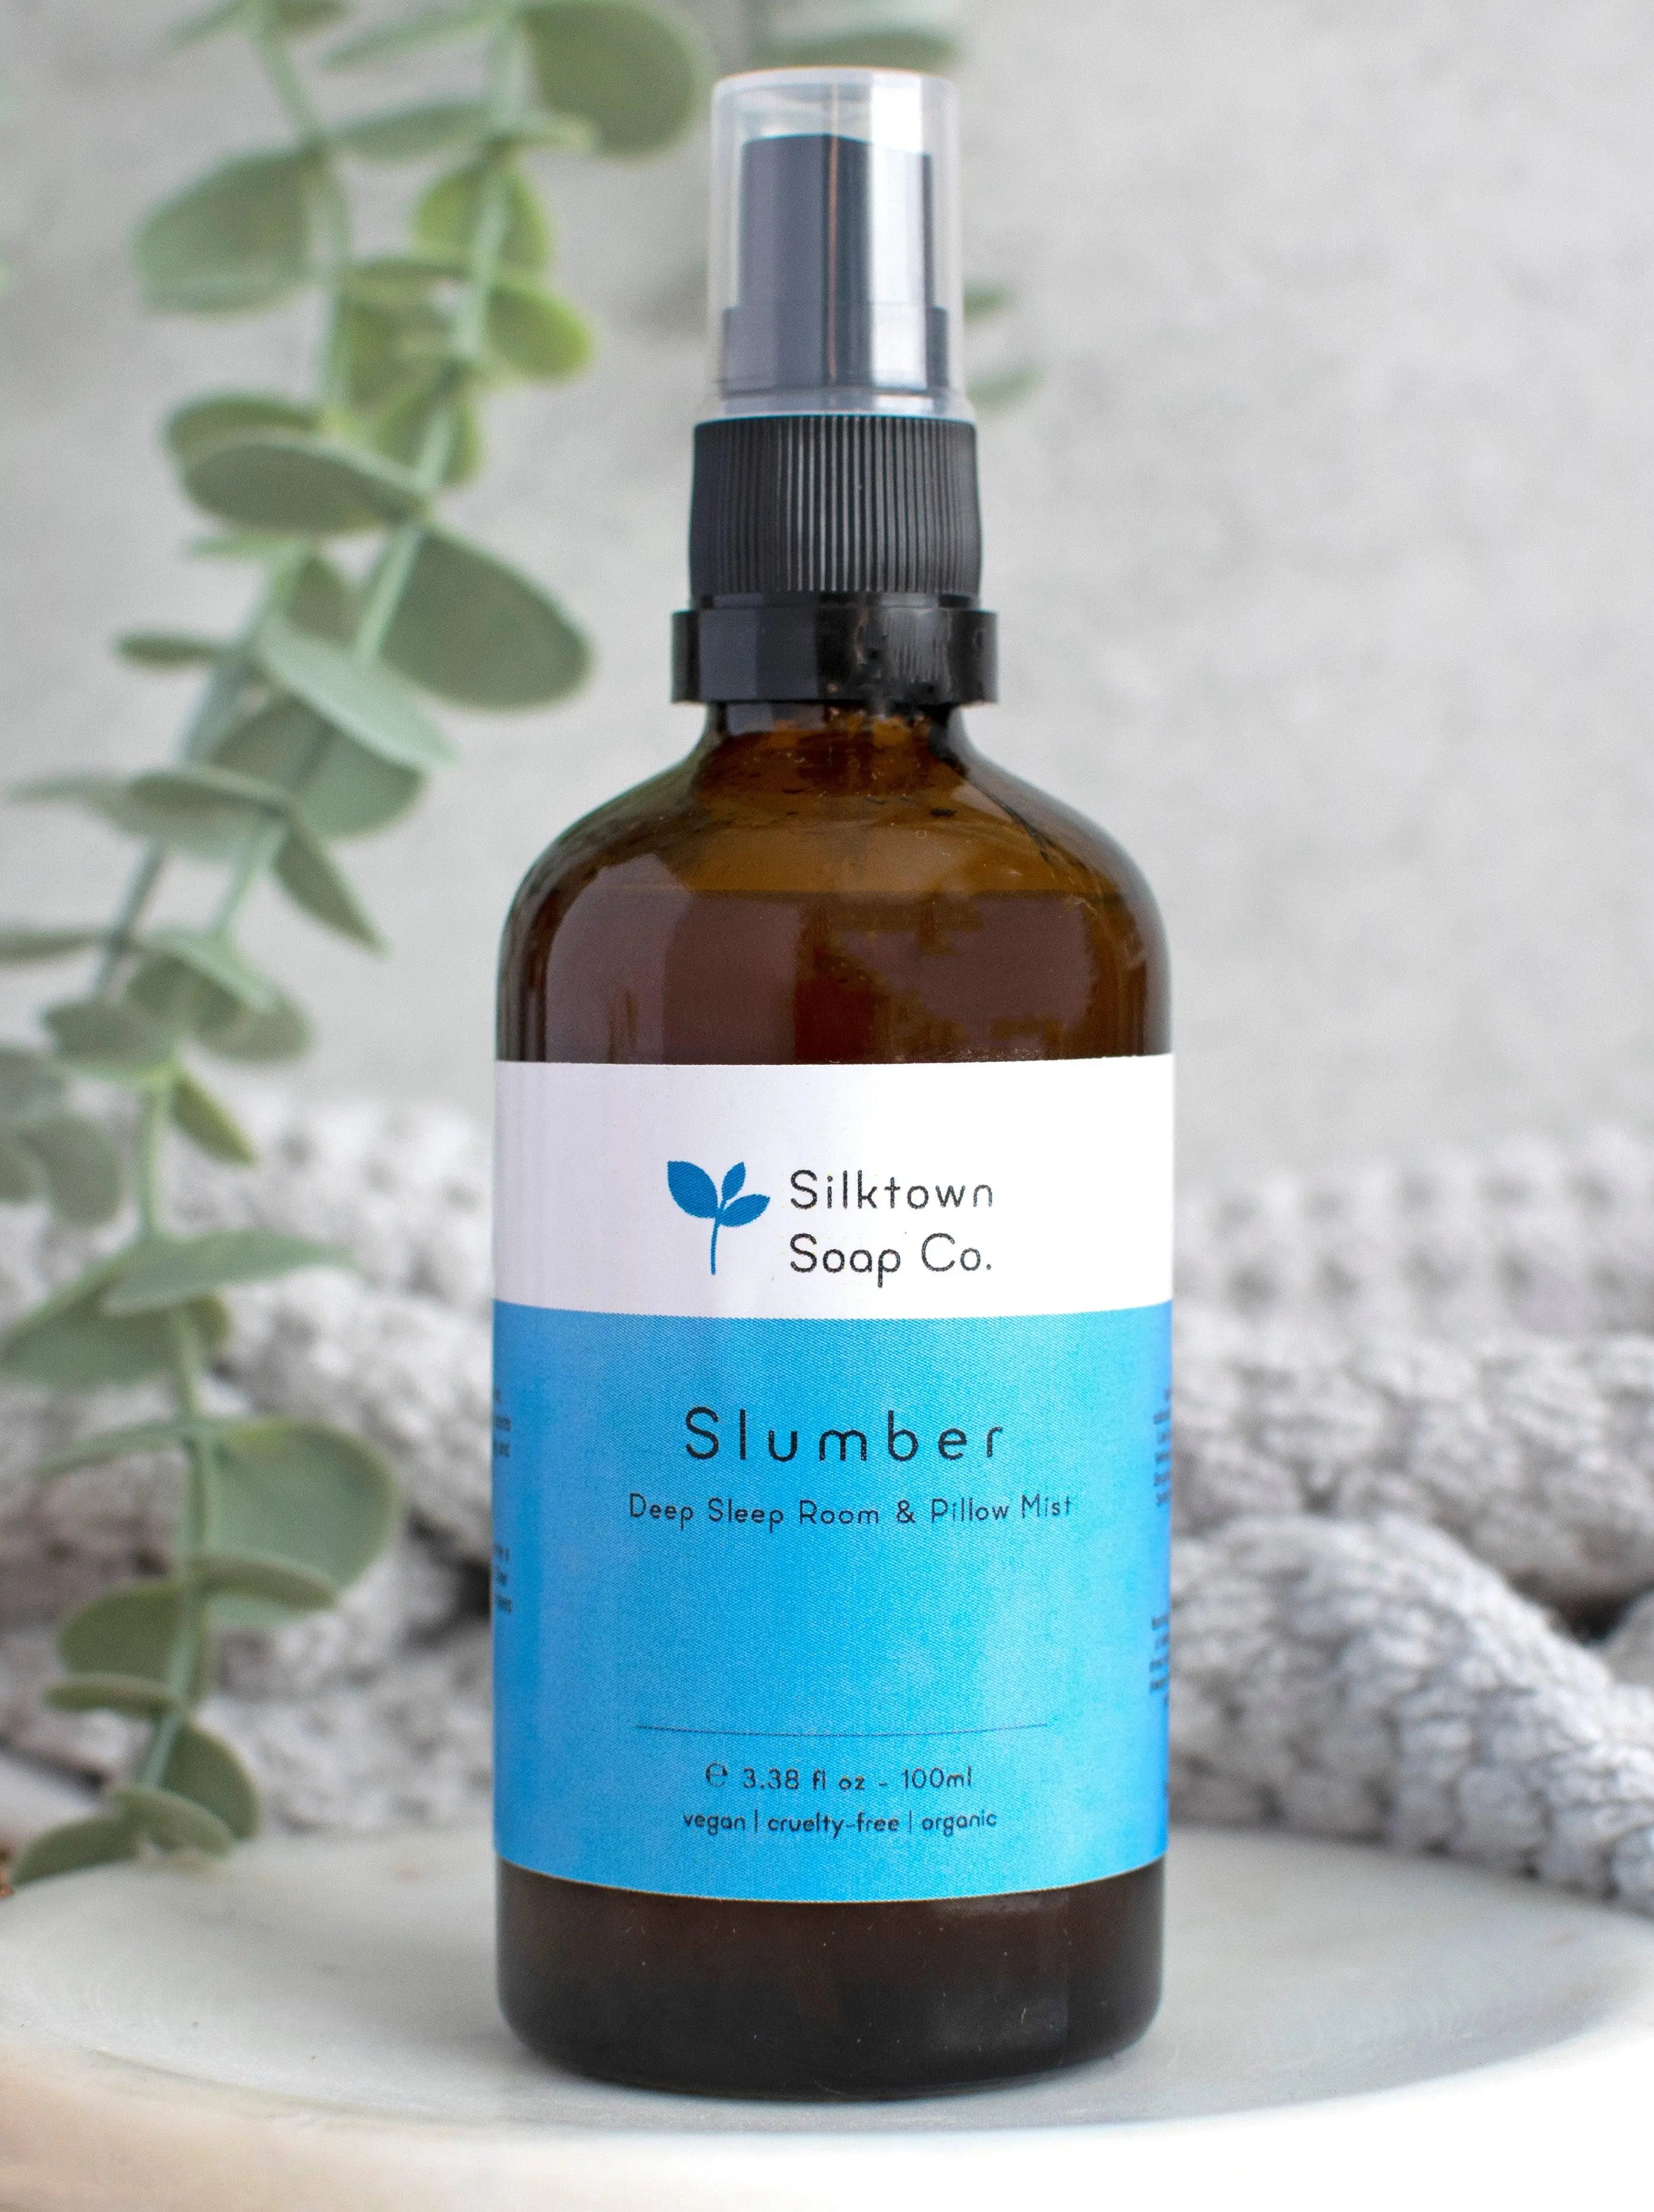 Slumber - Pillow and Room Mist - Silktown Soap Company 